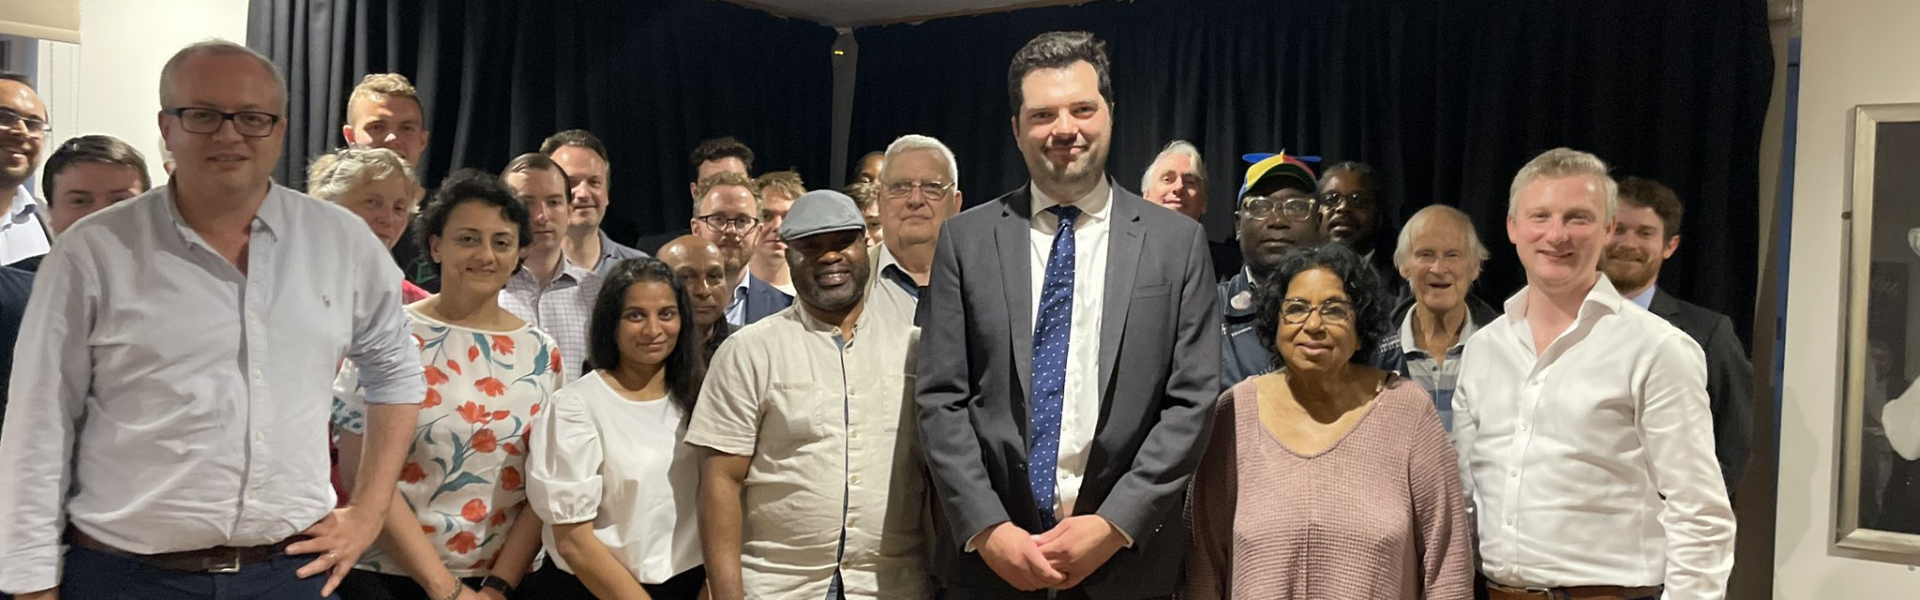 Kieran Terry selected as Assembly Candidate for Greenwich and Lewisham